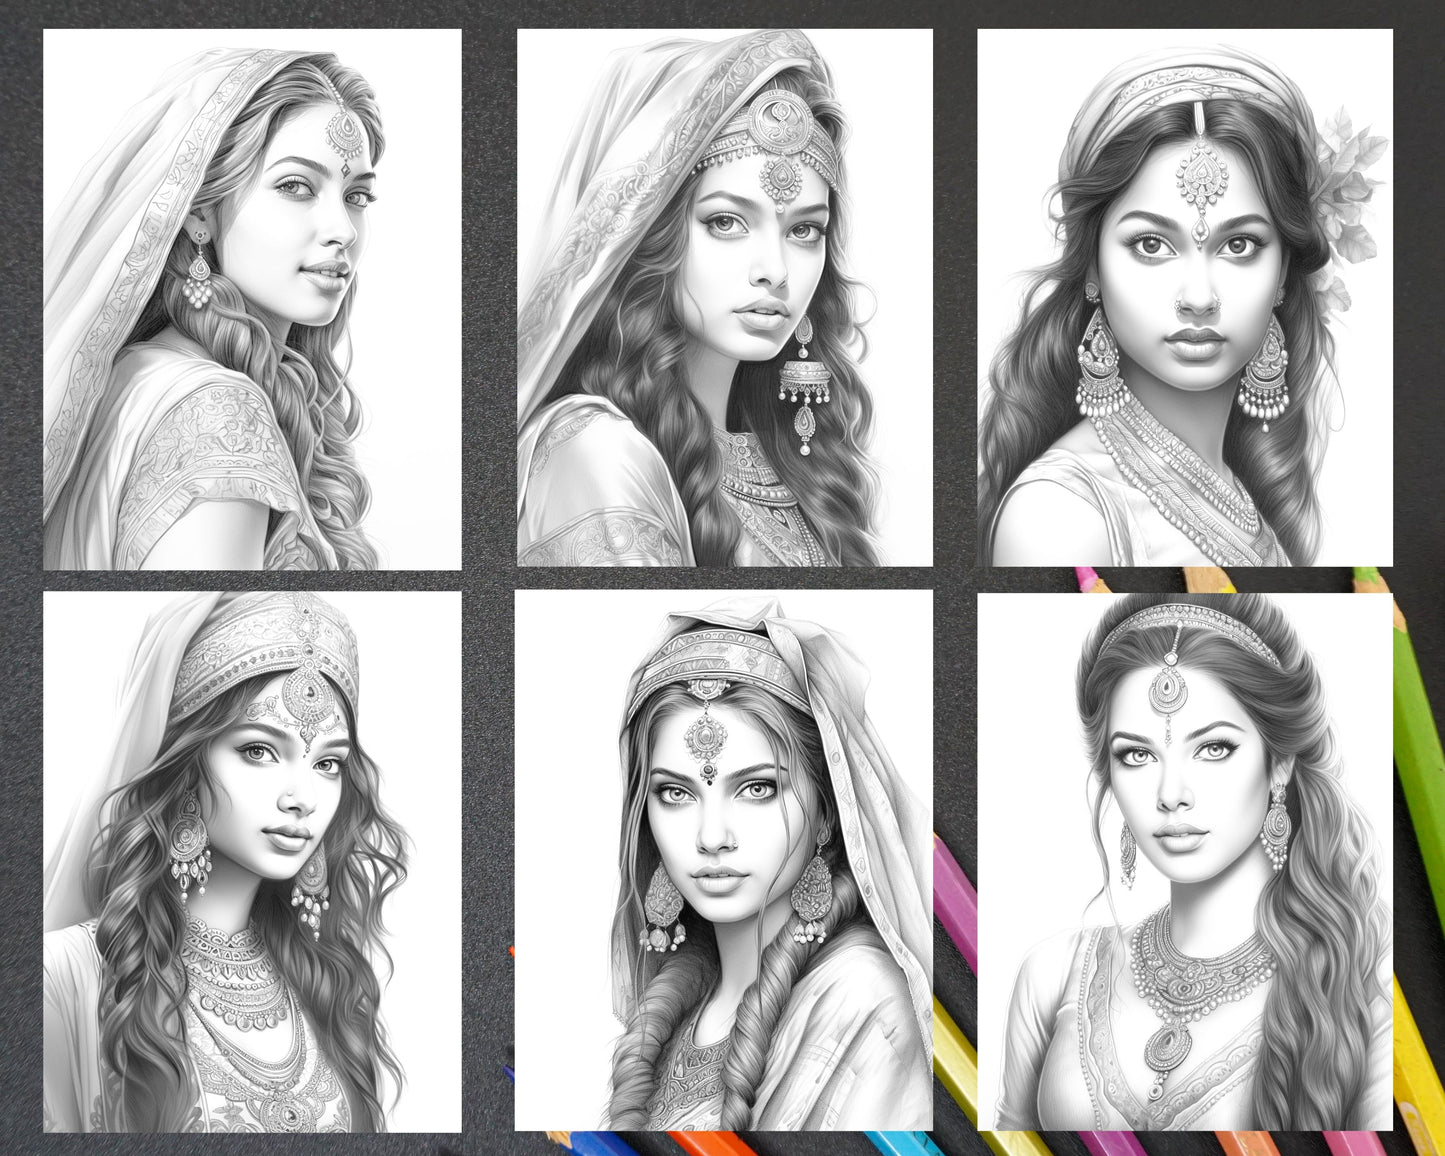 Indian Women Grayscale Coloring Pages, Stress Relief Adult Coloring Sheets, Mindful Coloring Activities for Relaxation, Detailed India Inspired Coloring Designs, Women Empowerment Coloring Pages, Portrait Coloring Pages for Adults